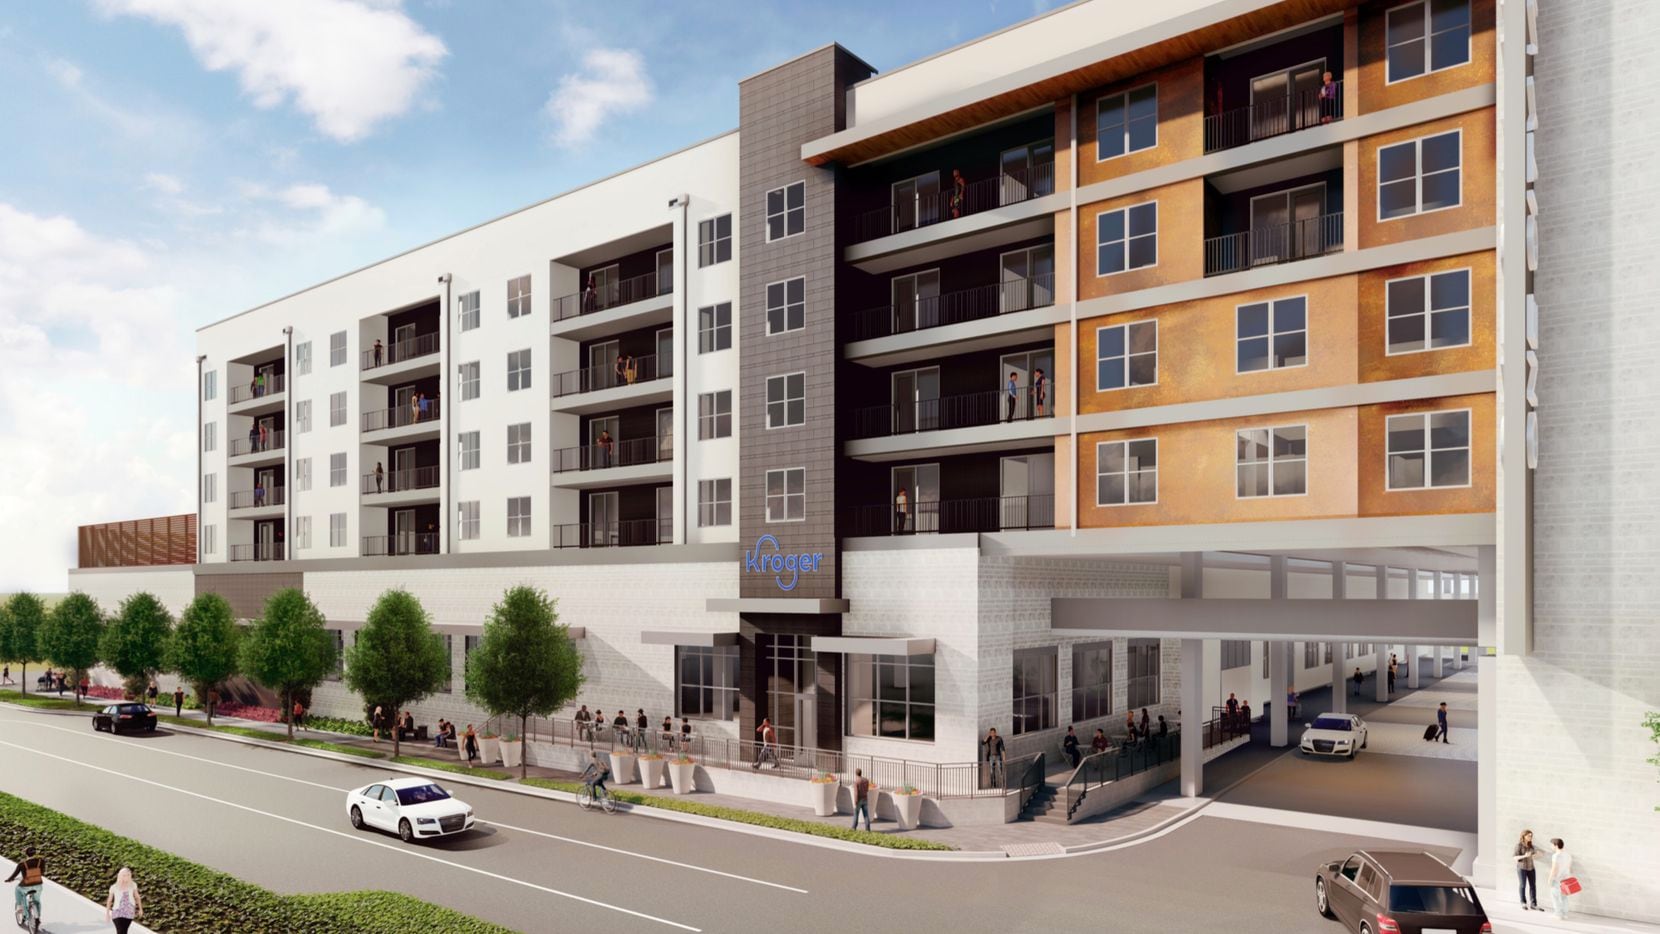 The One City View project will include 375 apartments.